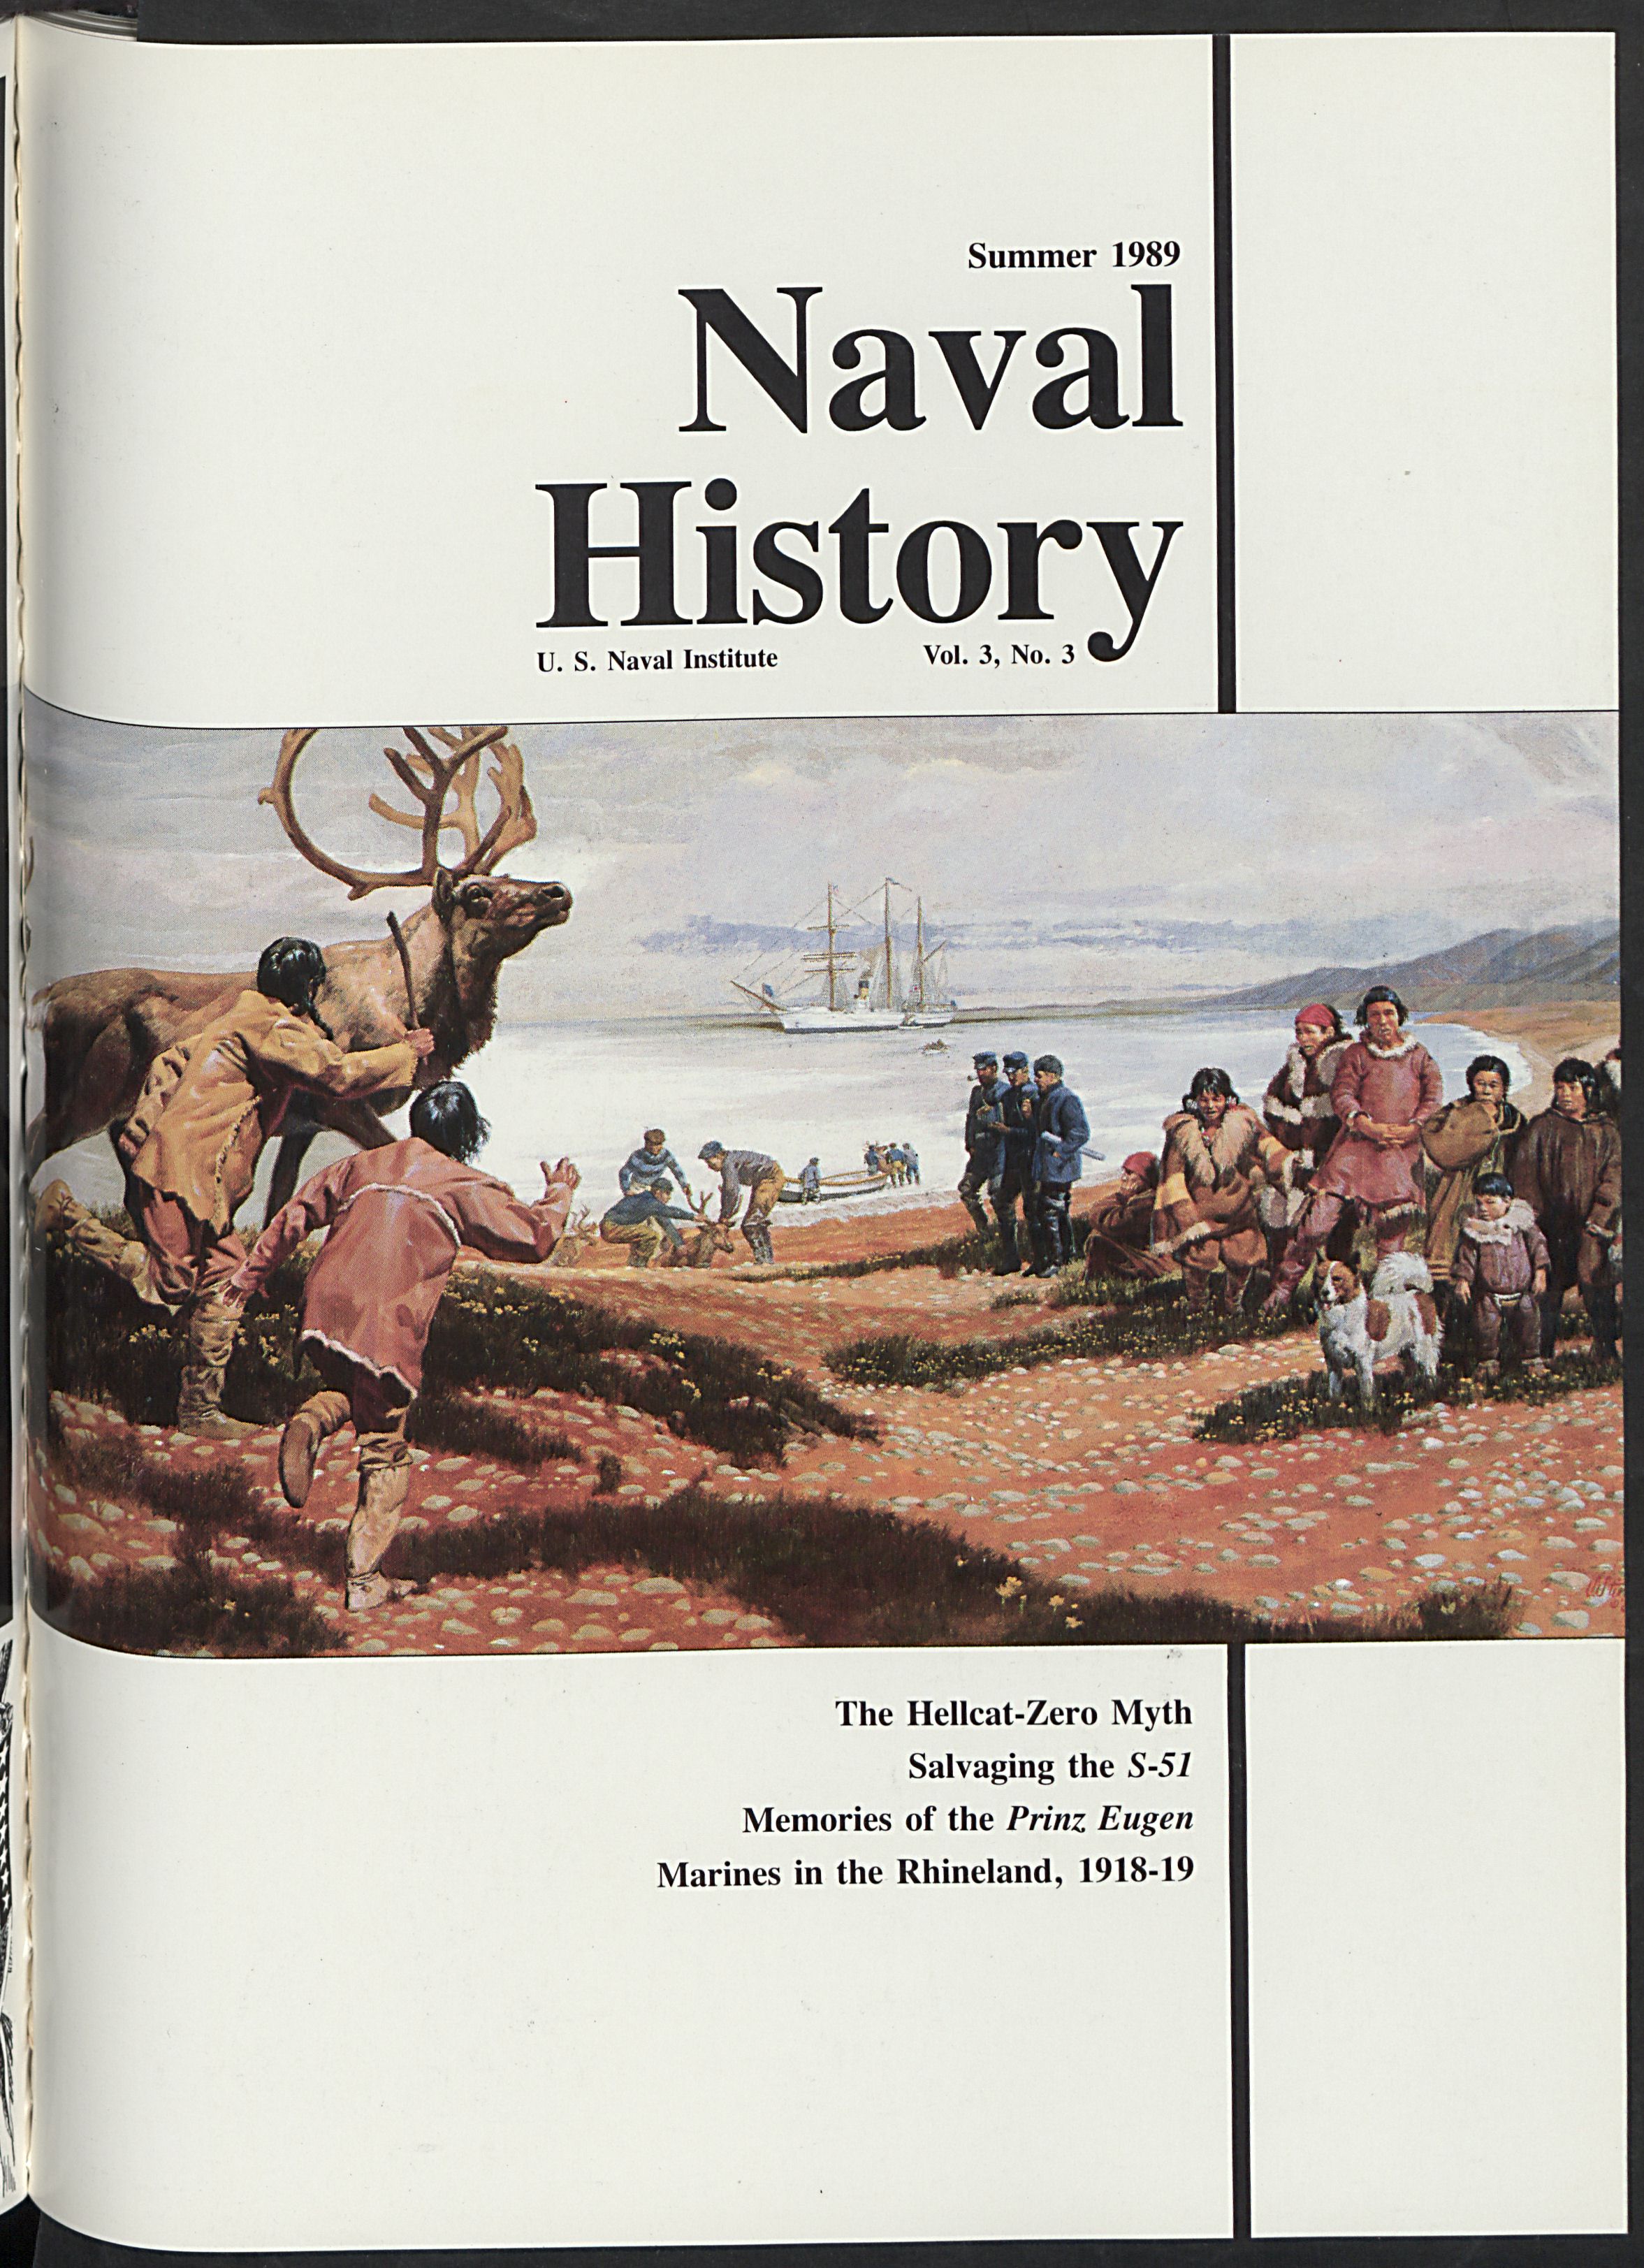 NH Summer 1989 cover